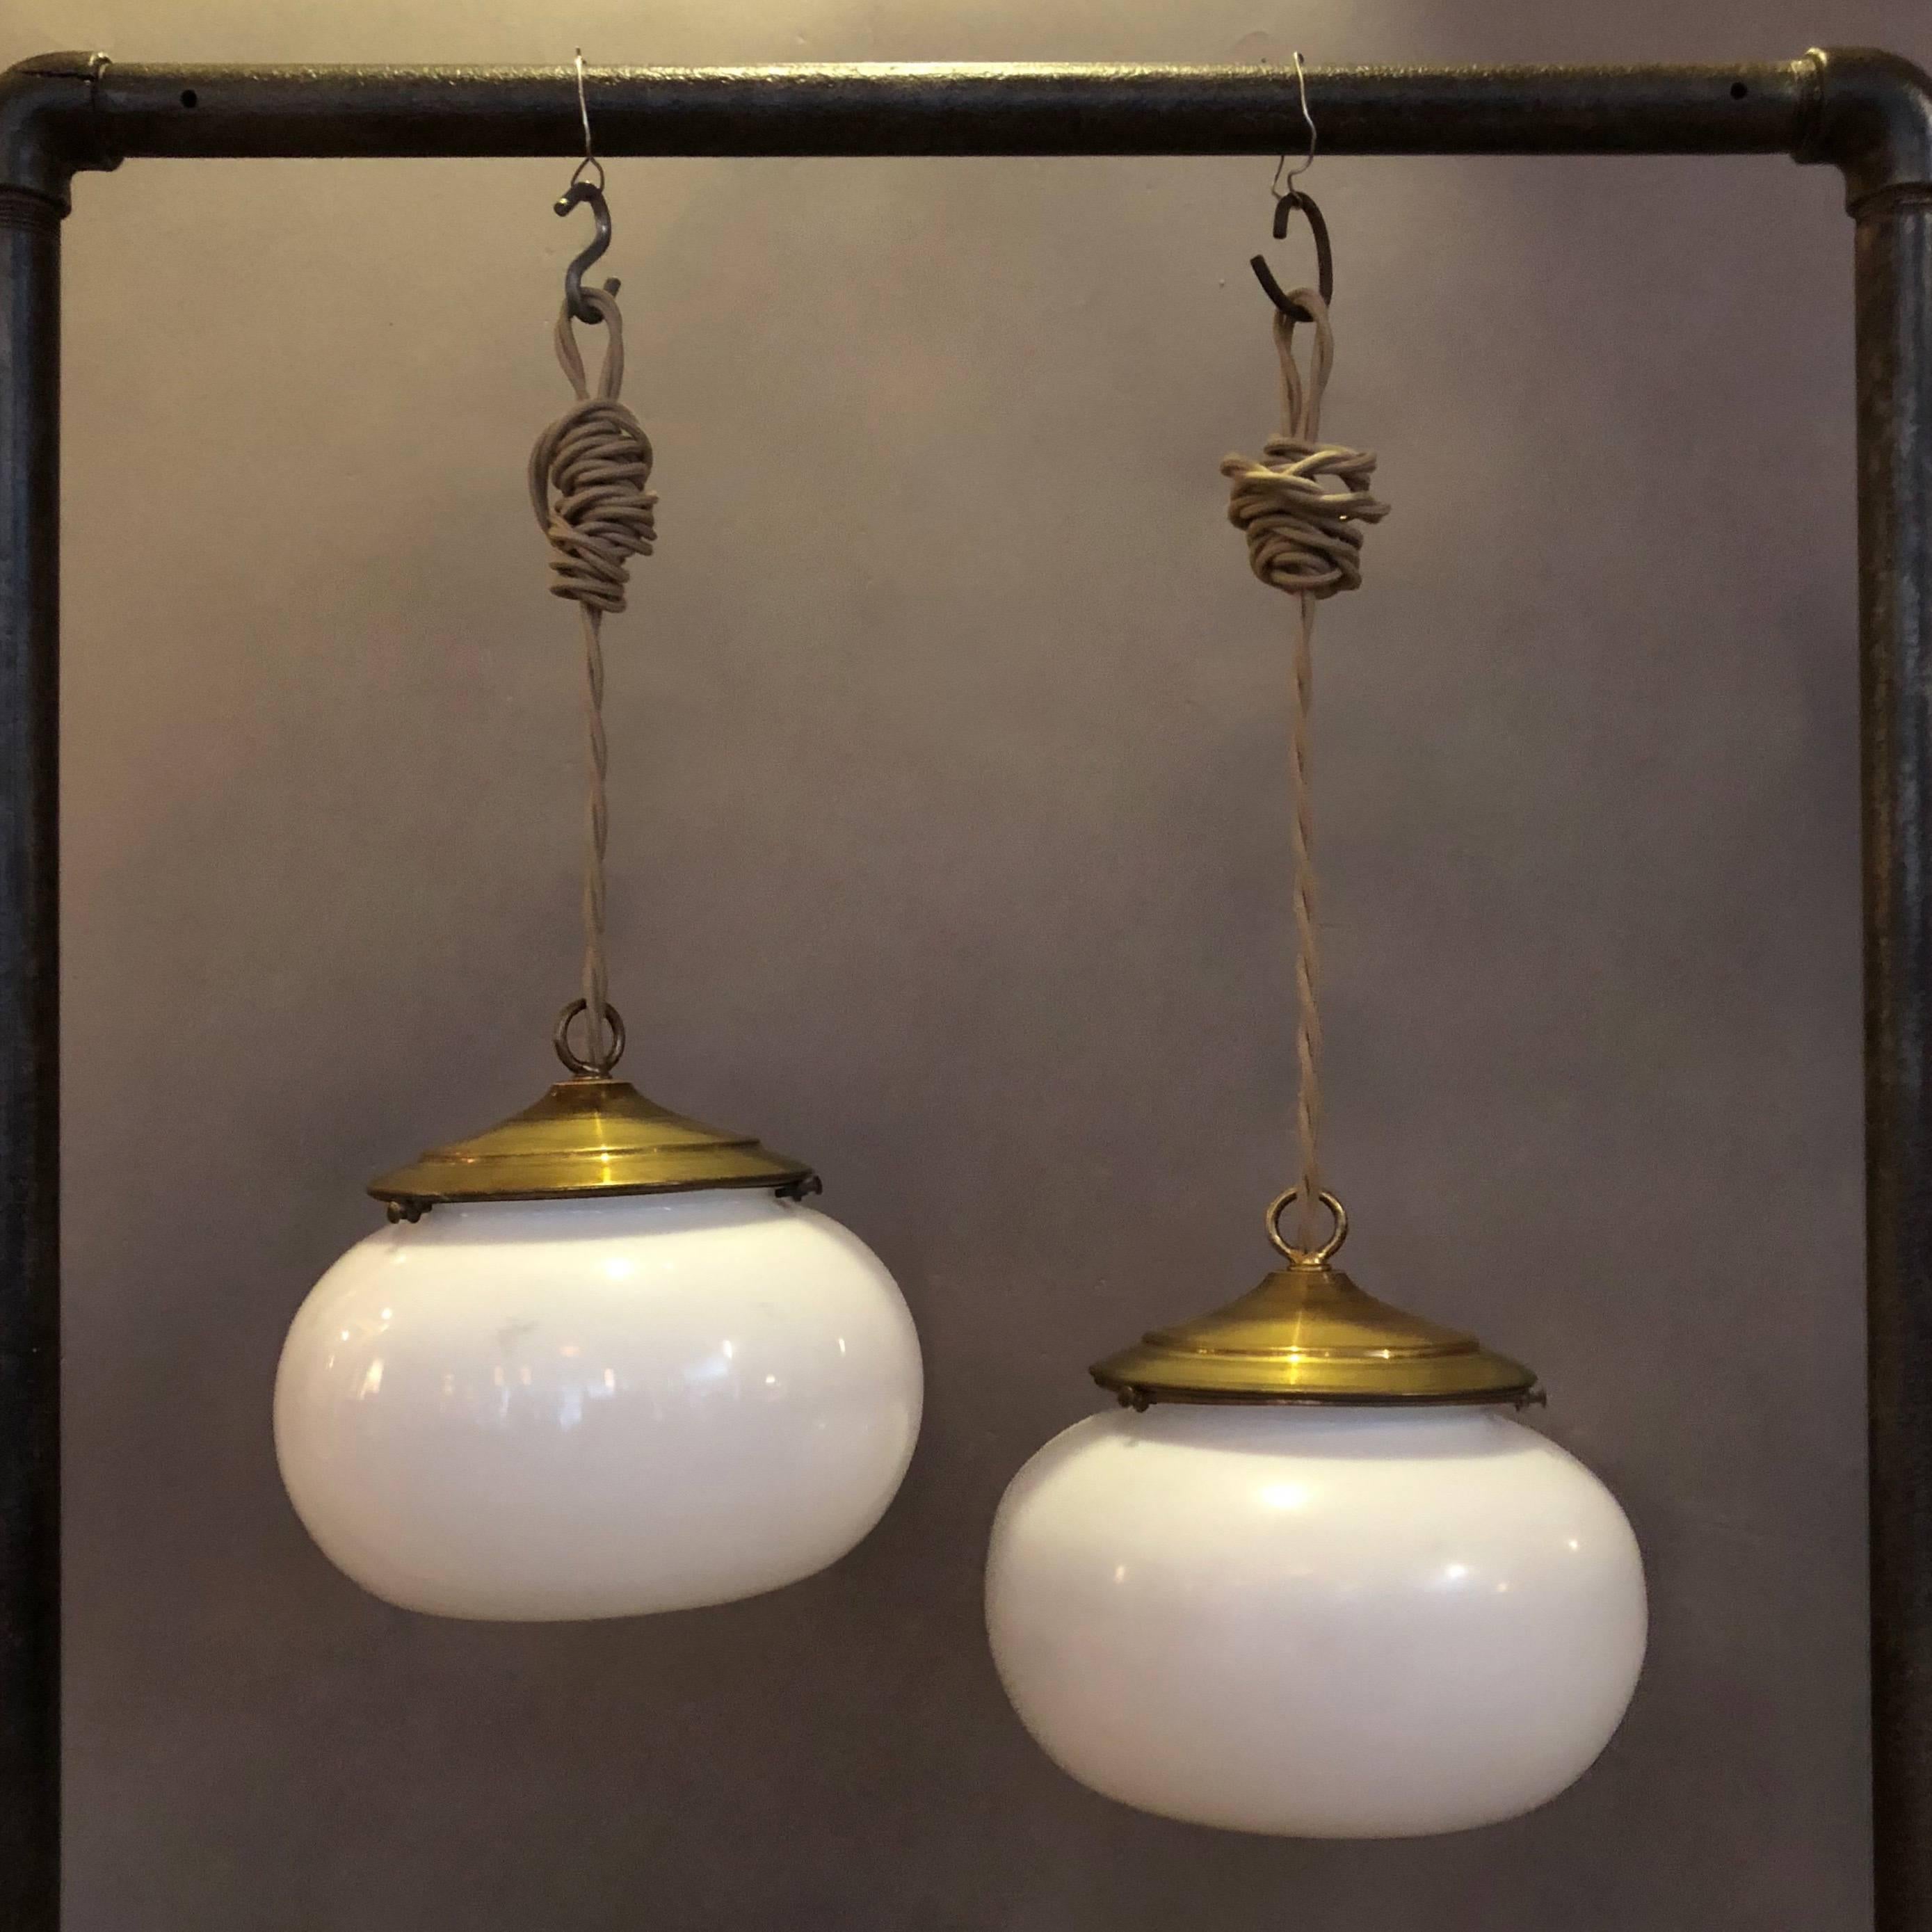 Pair of Industrial pendant lights feature antique, converted gaslight, orb shaped, open bottom, milk glass shades with wide brass fitters. The lamps are newly wired with 48 inches of braided cloth cord to accept 150 watt bulbs.